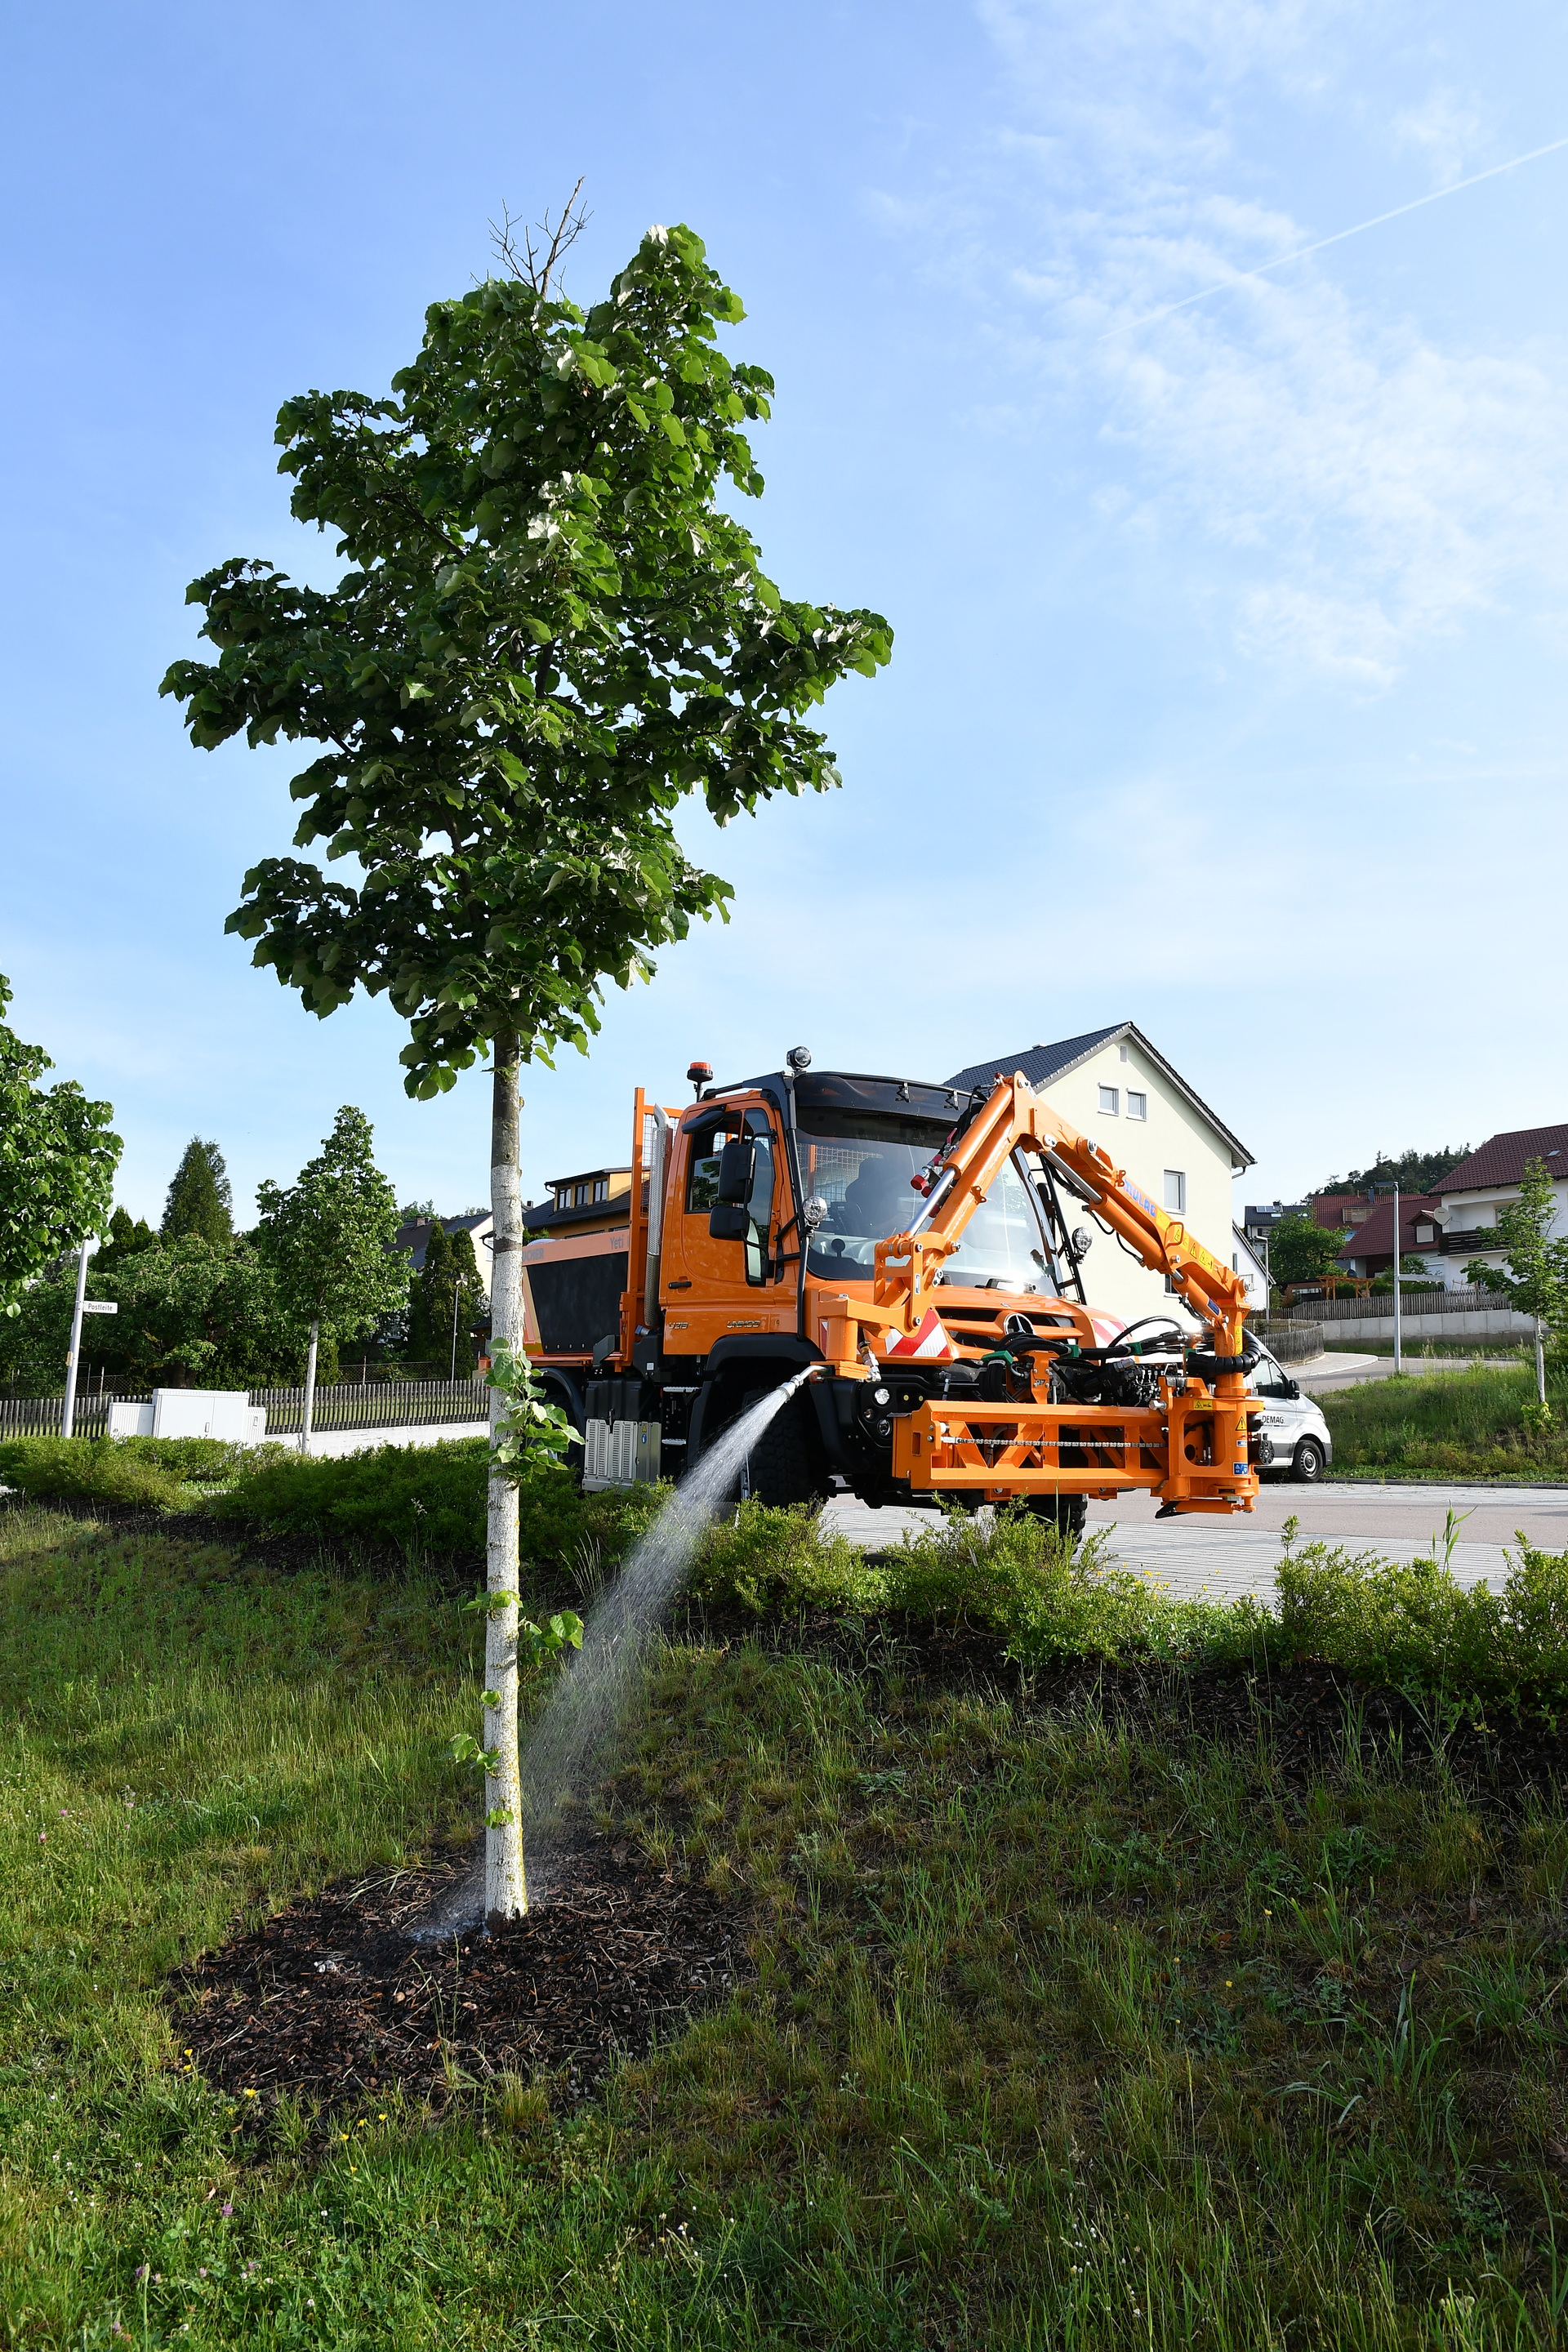 Mercedes-Benz Trucks showcases sustainable municipal mobility solutions at IFAT 2022 in Munich